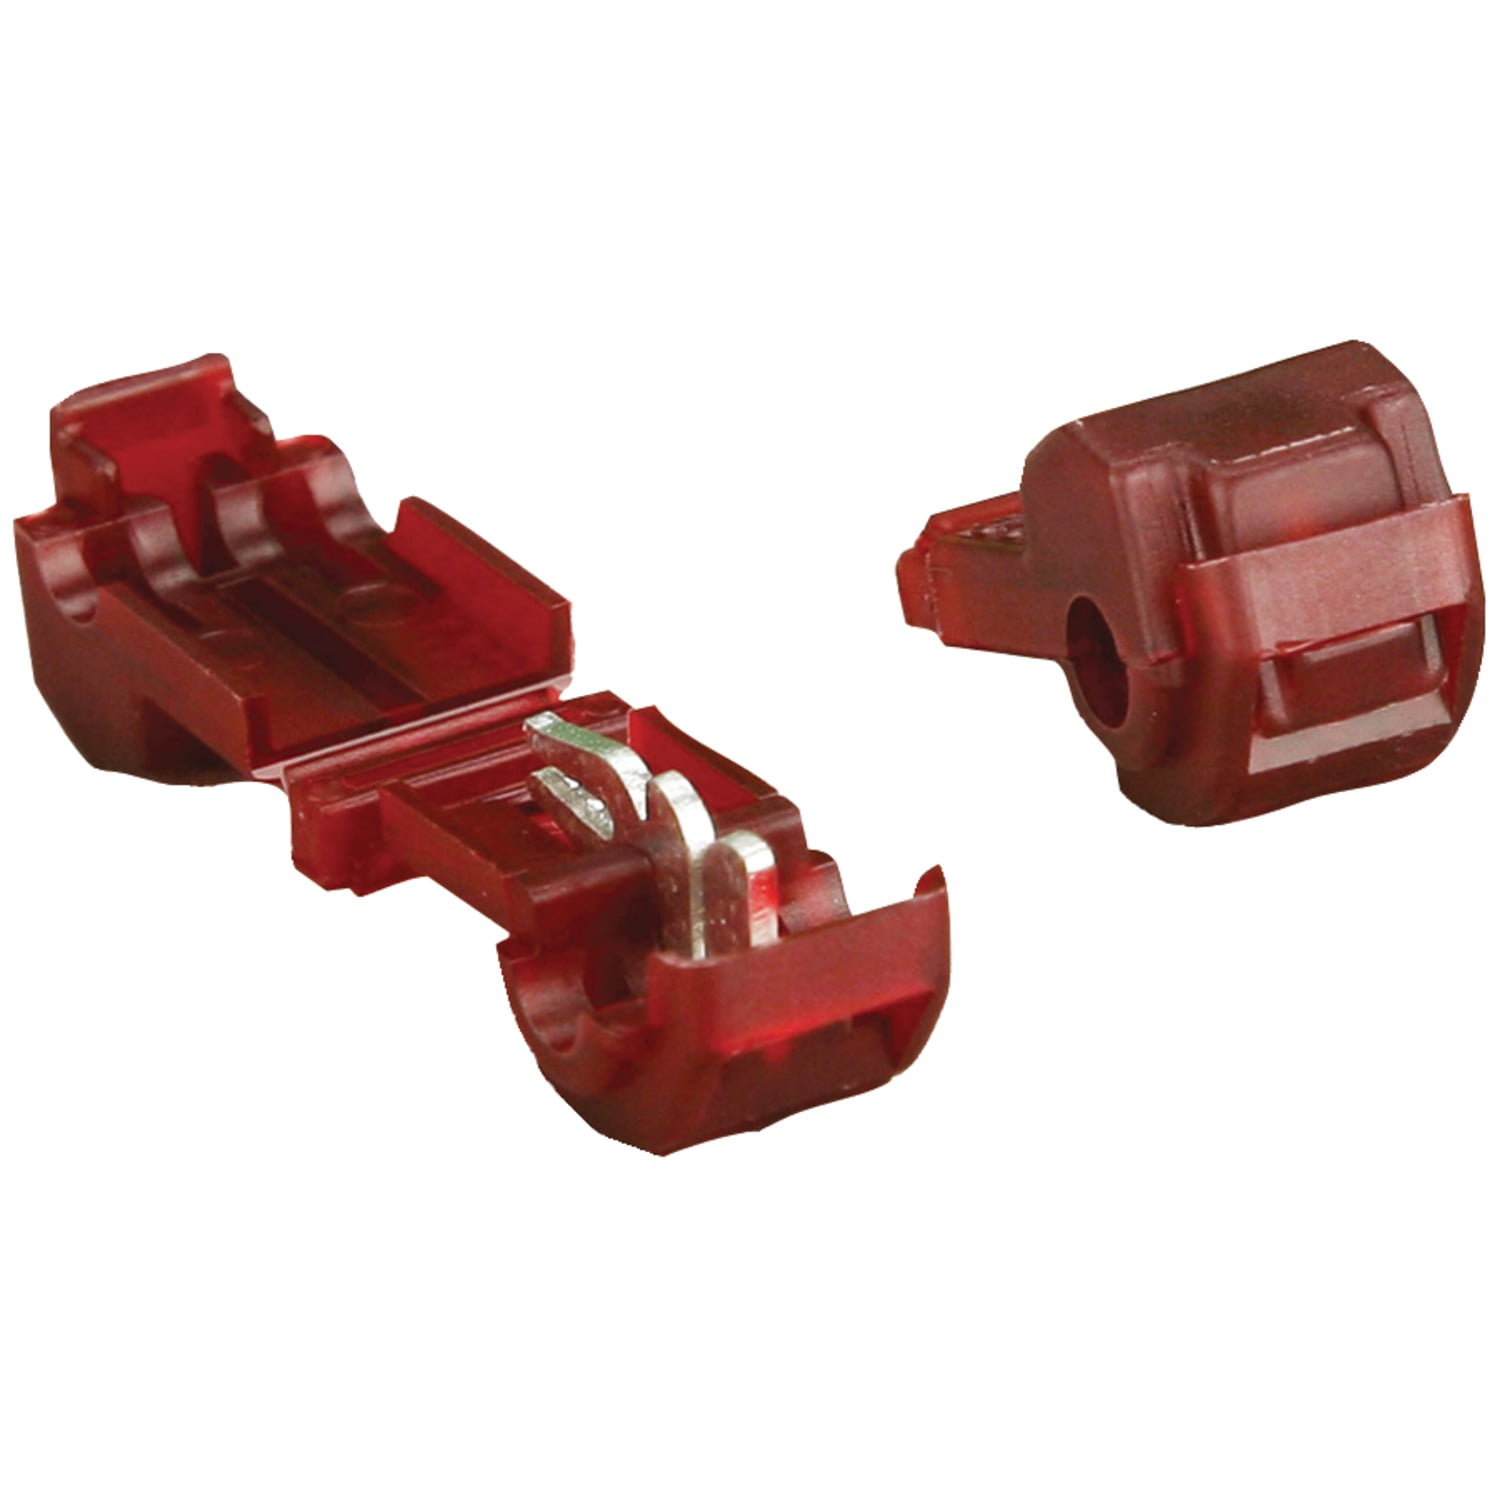 Red Instant Tap Connector 22-18 Gauge Package of 100 